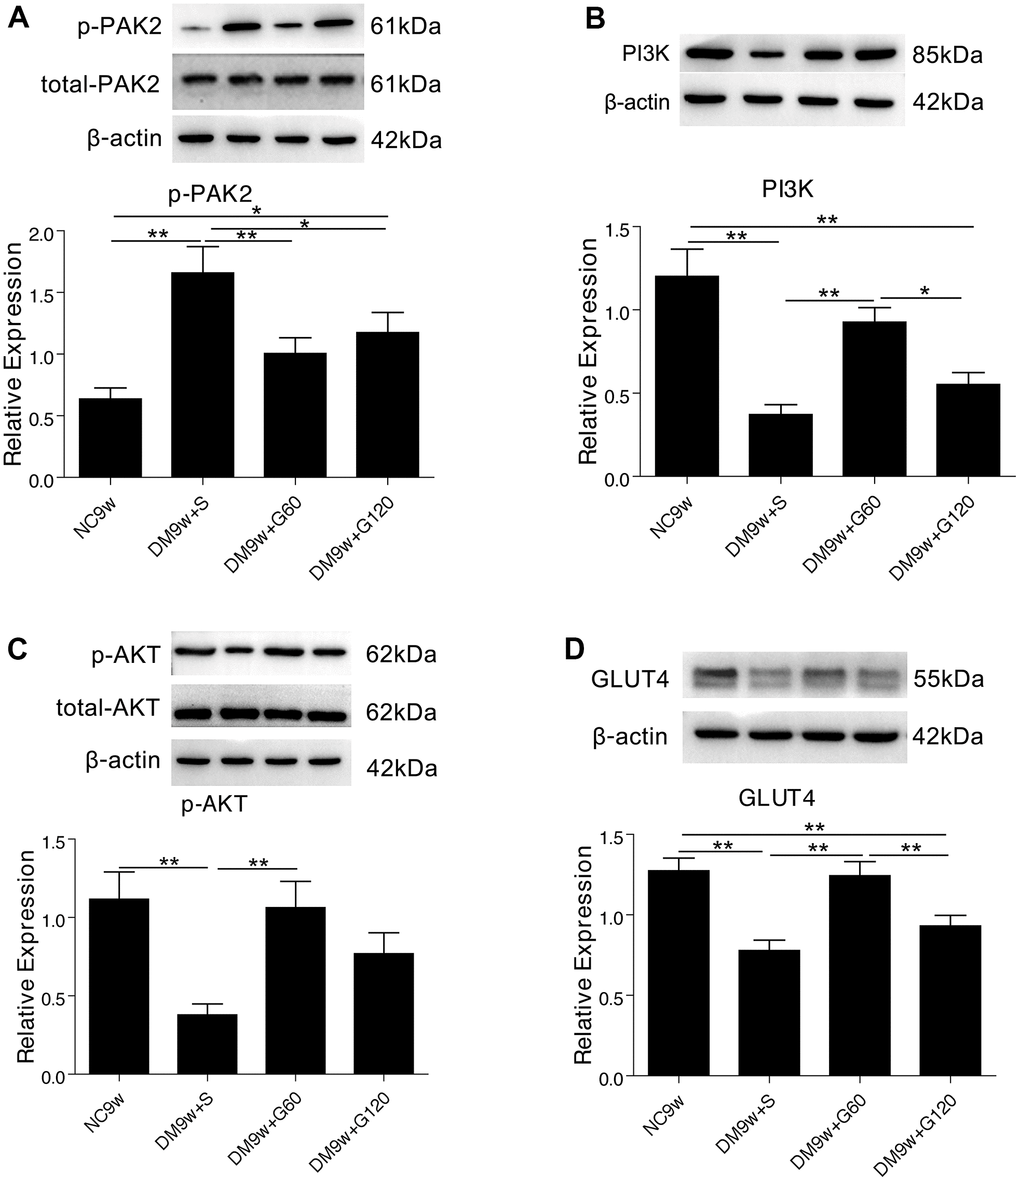 Gastrodin intervention suppressed diabetes induced PAK2 phosphorylation and activated PI3K/AKT/GLUT4 pathway. Western blot analysis of p-PAK2 (A) PI3K (B) p-AKT (C) and GLUT4 (D) protein expression in the hippocampus of the NC9W, DM9W+S, DM9W+G60 and DM9W+G120 groups. Bar graphs represented optical density of these factors normalized with β-actin, while p-PAK2 and p-AKT were further normalized with total-PAK2 and total-AKT respectively. *p 